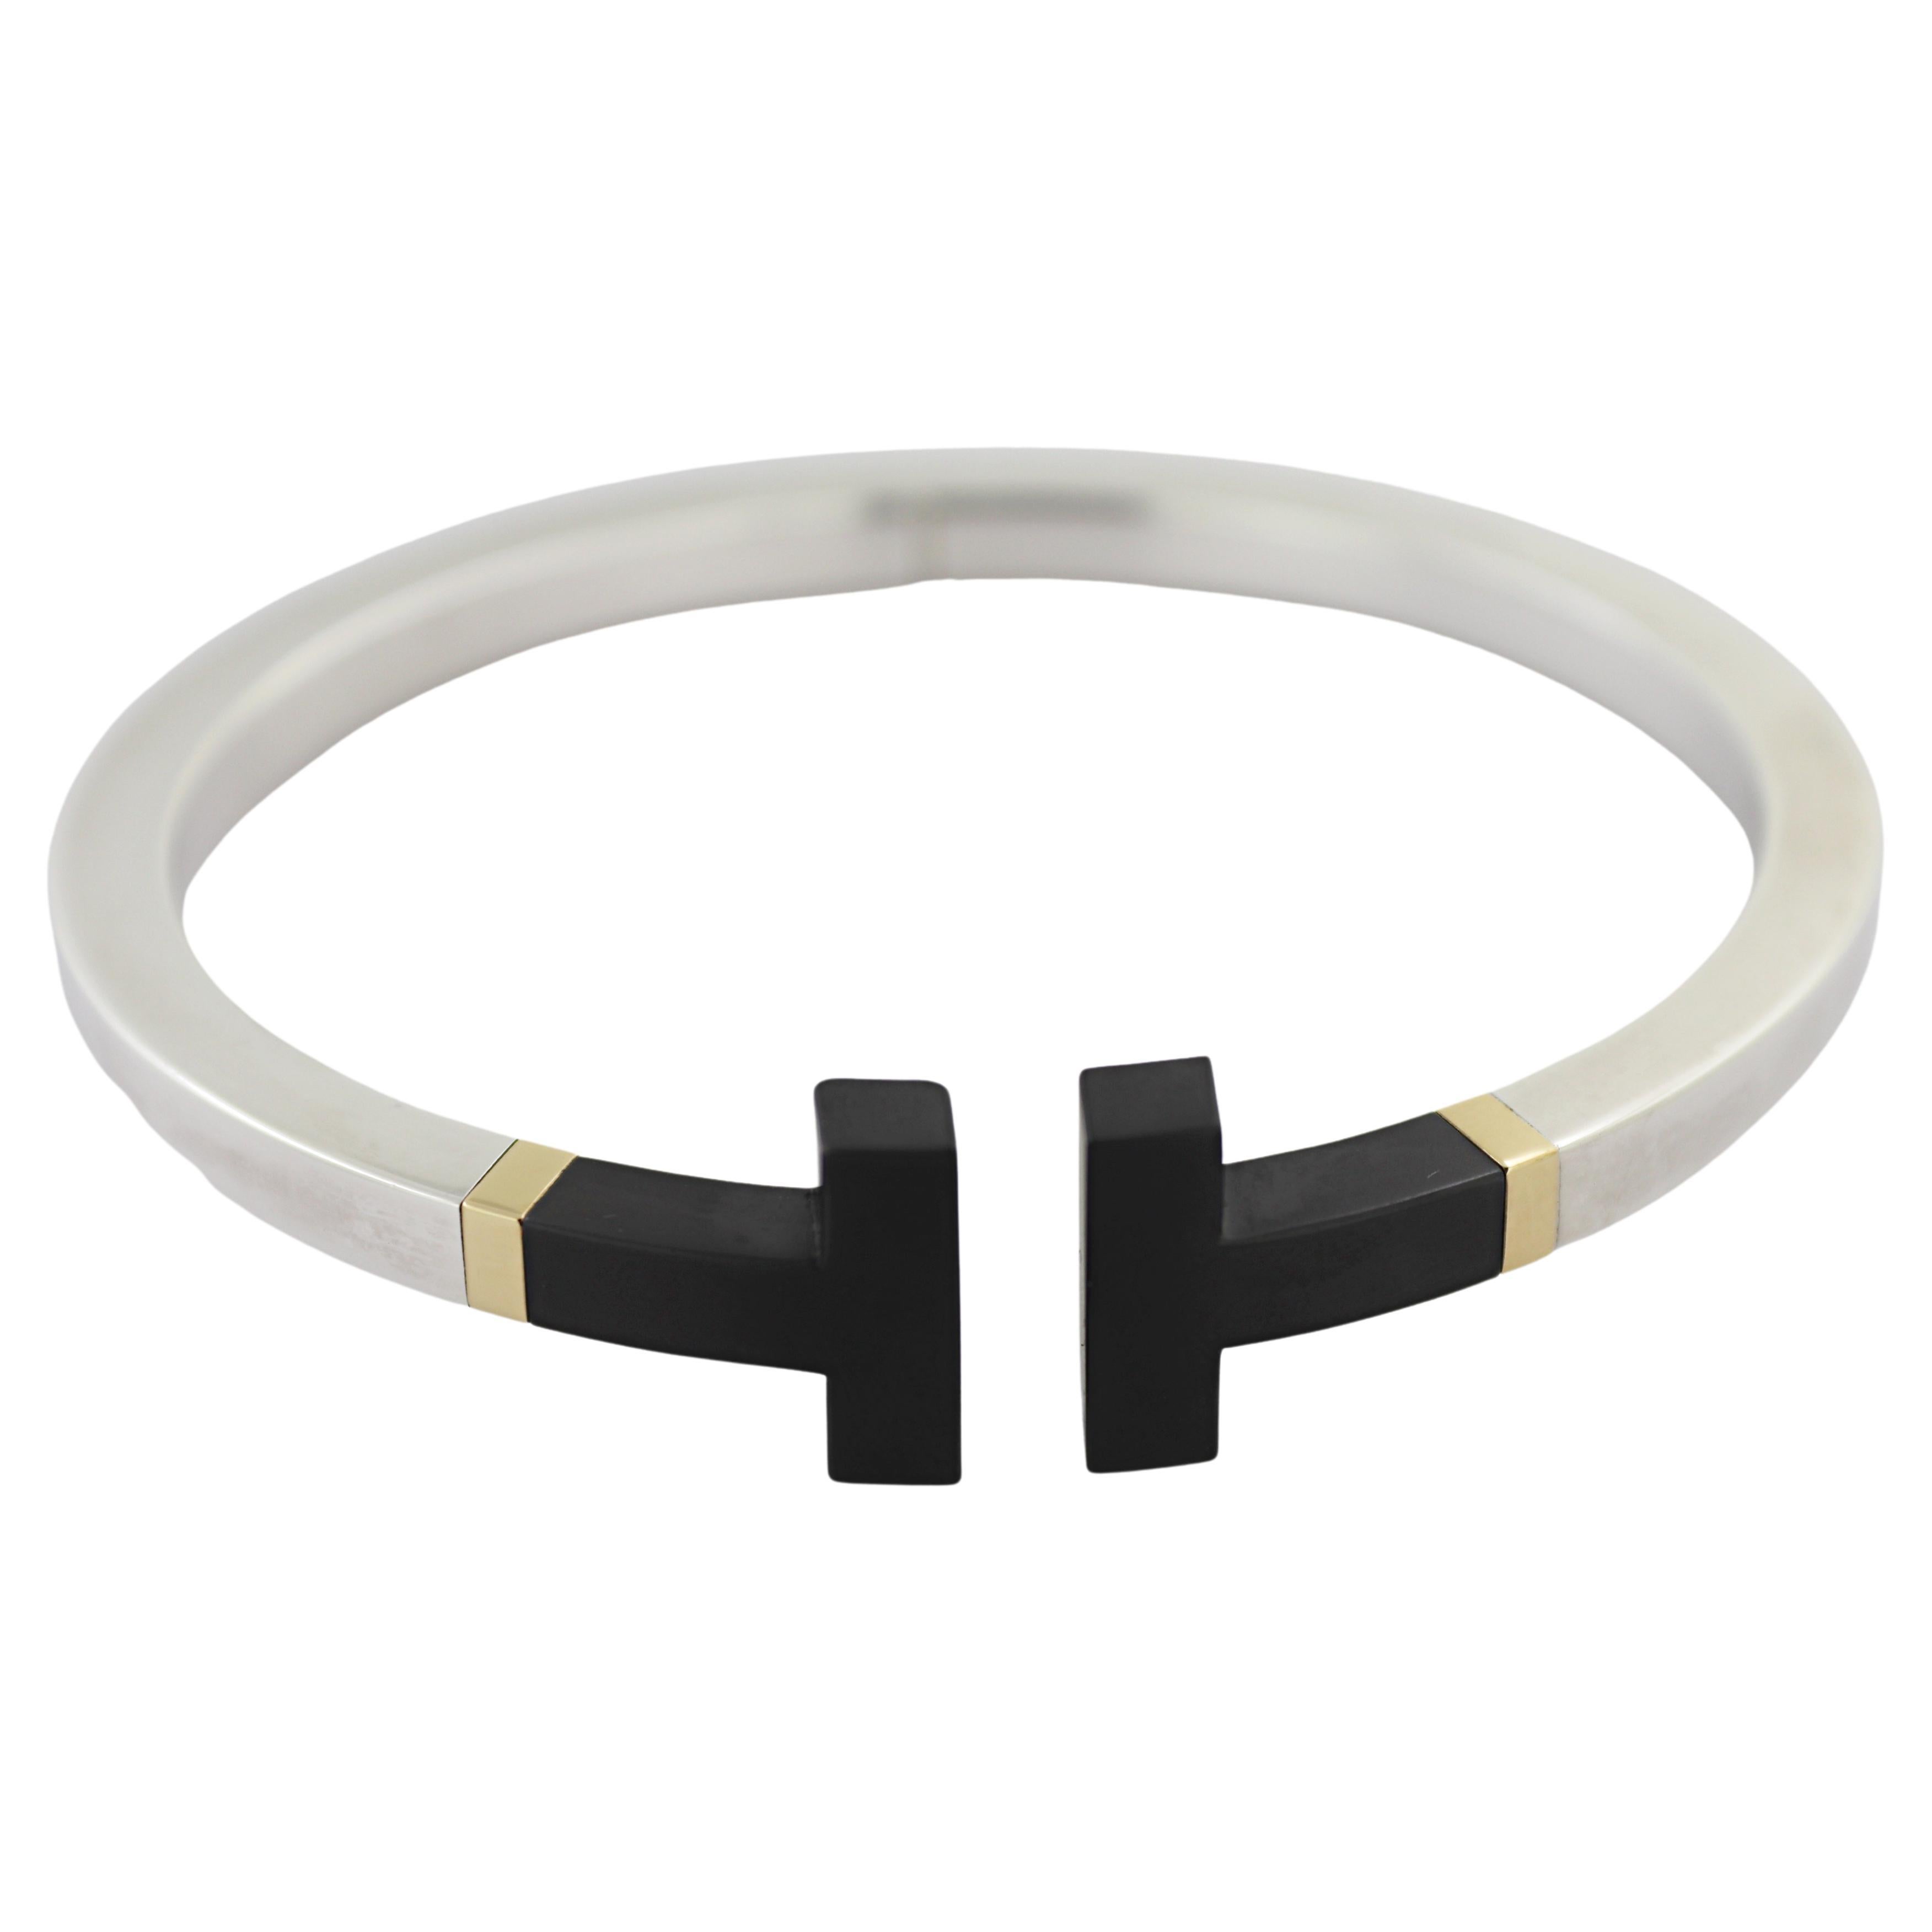 Tiffany & Co. Ceramic, Sterling Silver, 18k Yellow Gold “T” Bracelet For Sale